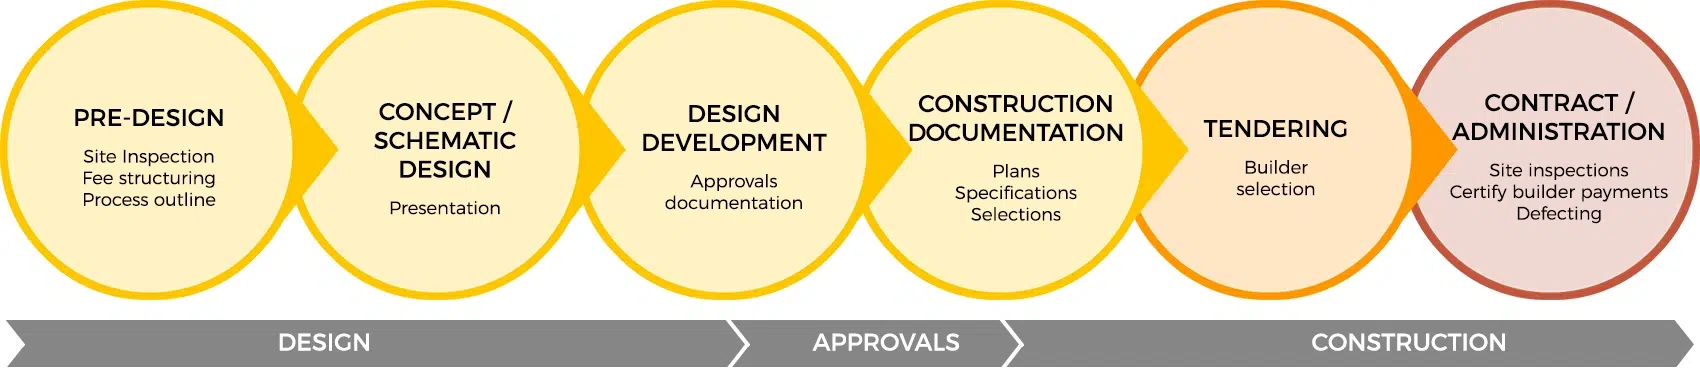 Stages involved in the design services provided by residential architects in Sydney